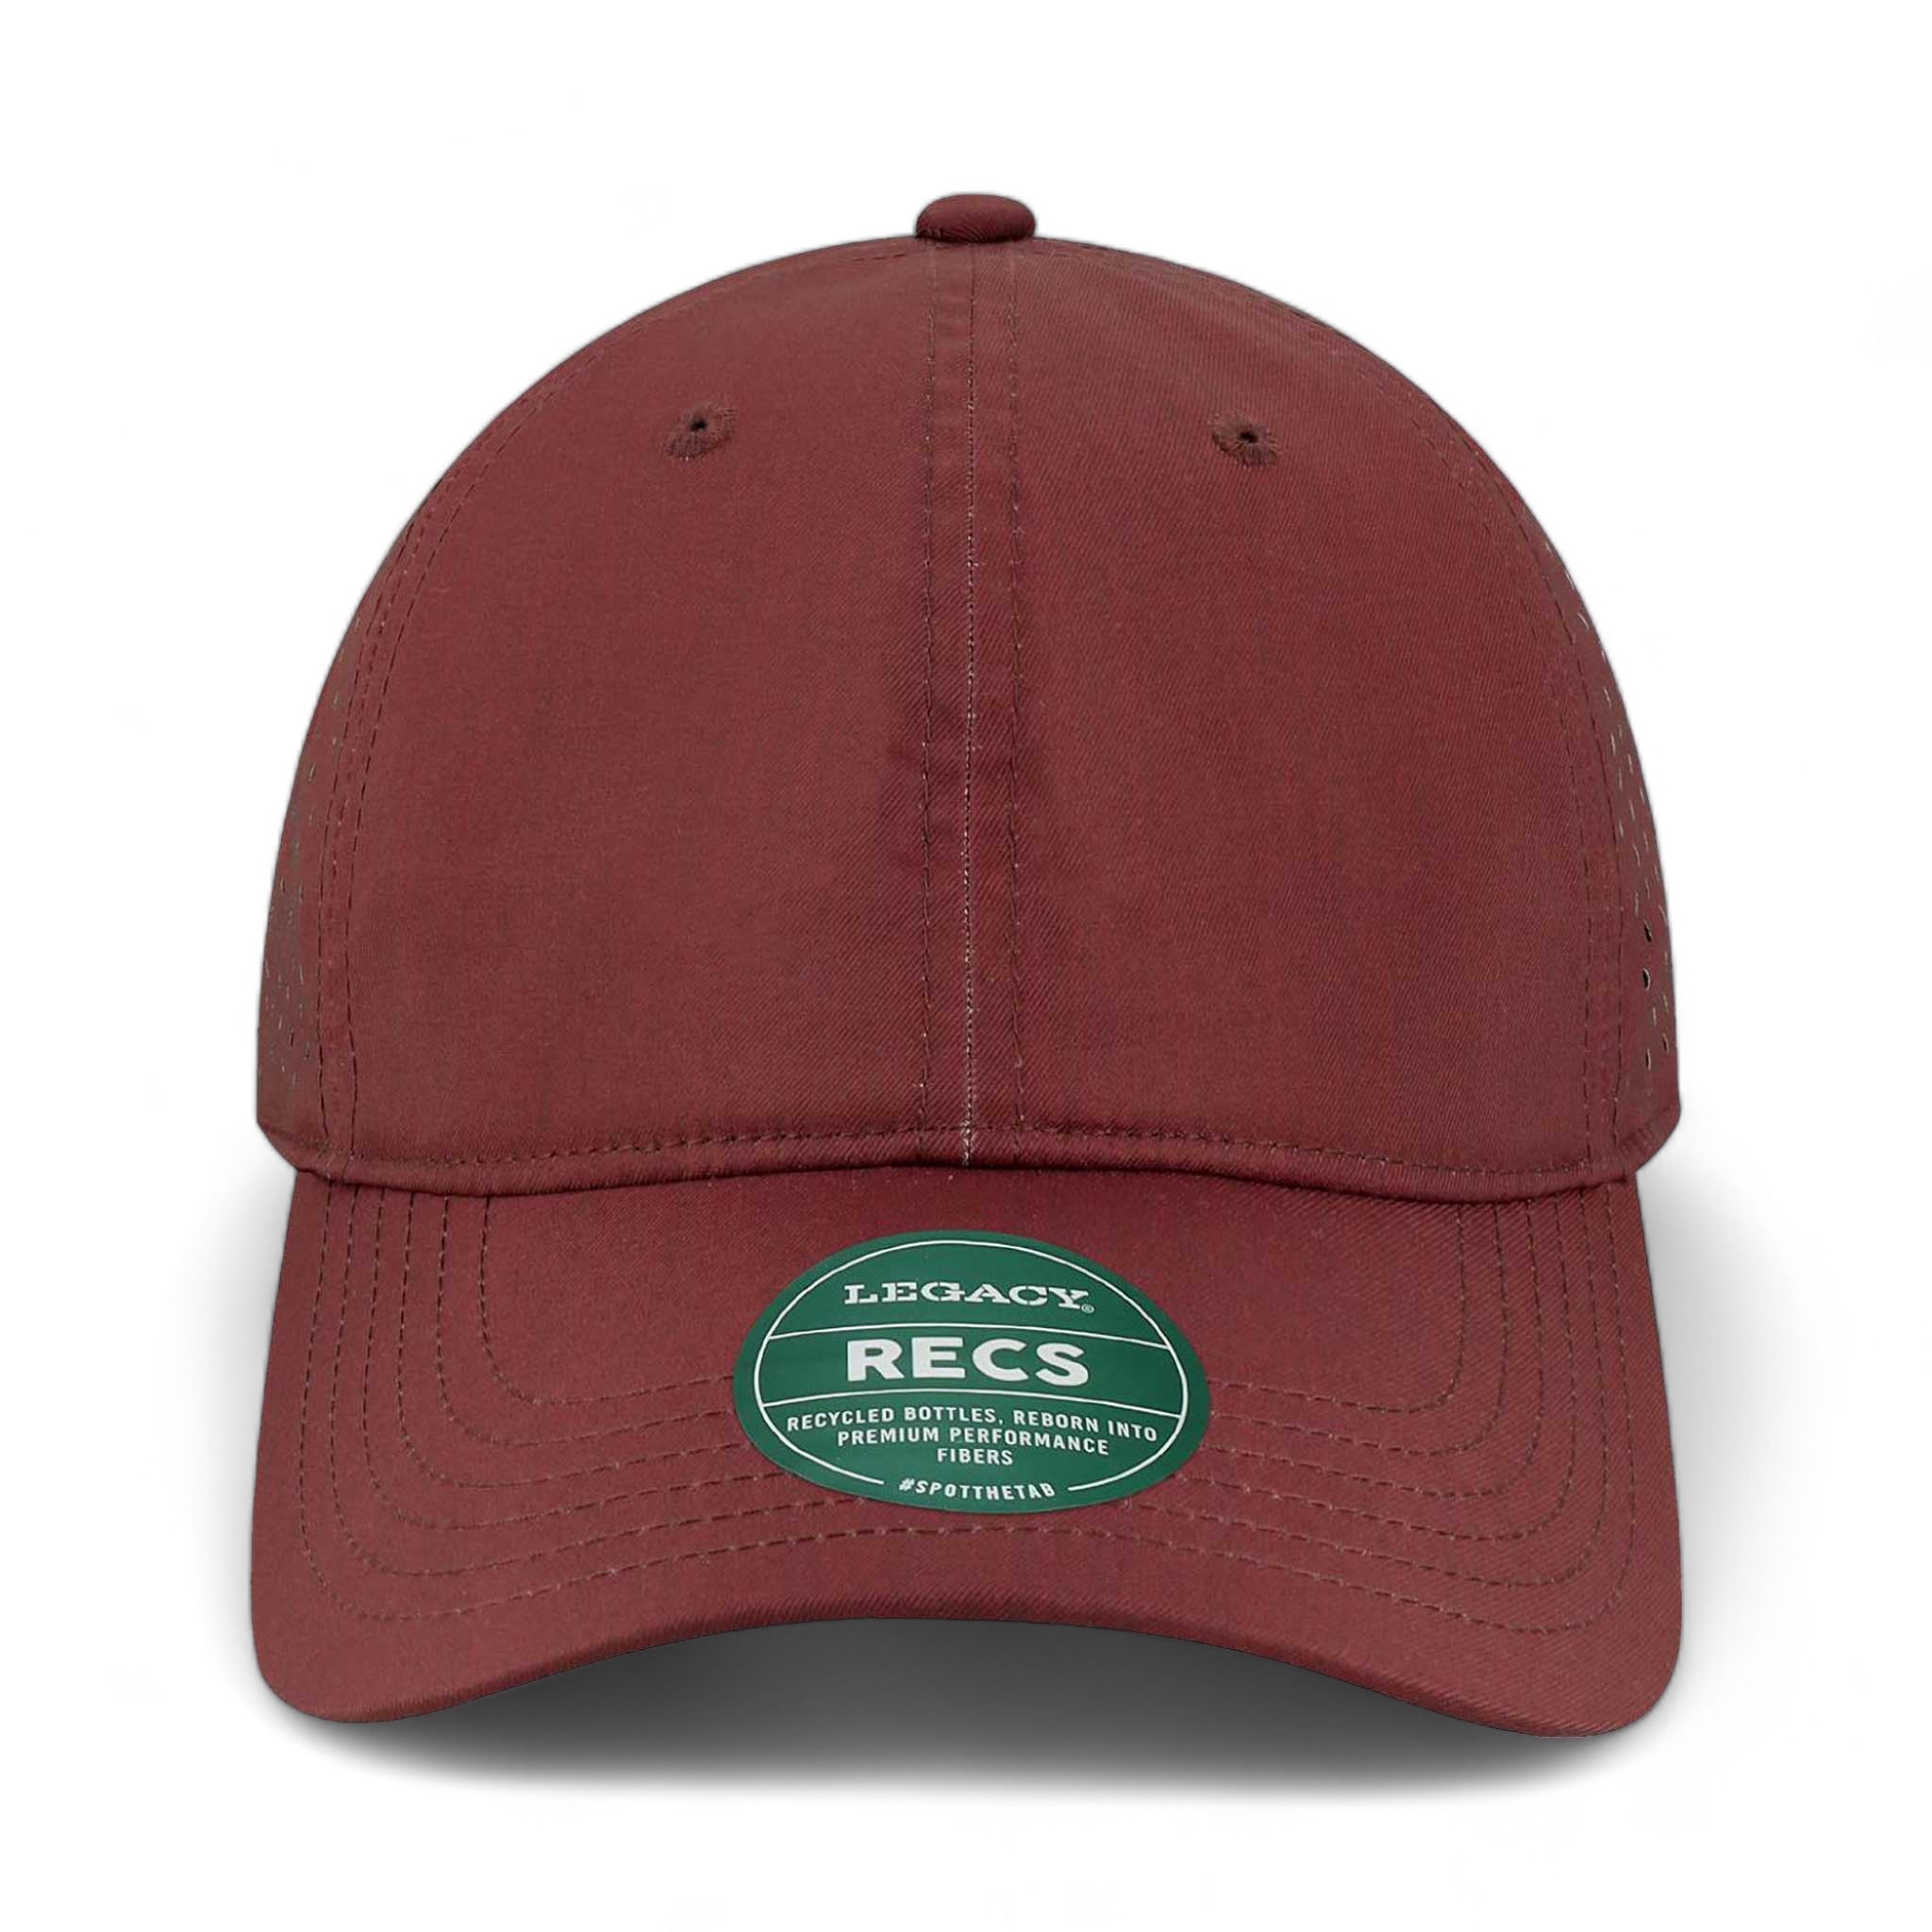 Front view of LEGACY RECS custom hat in eco maroon